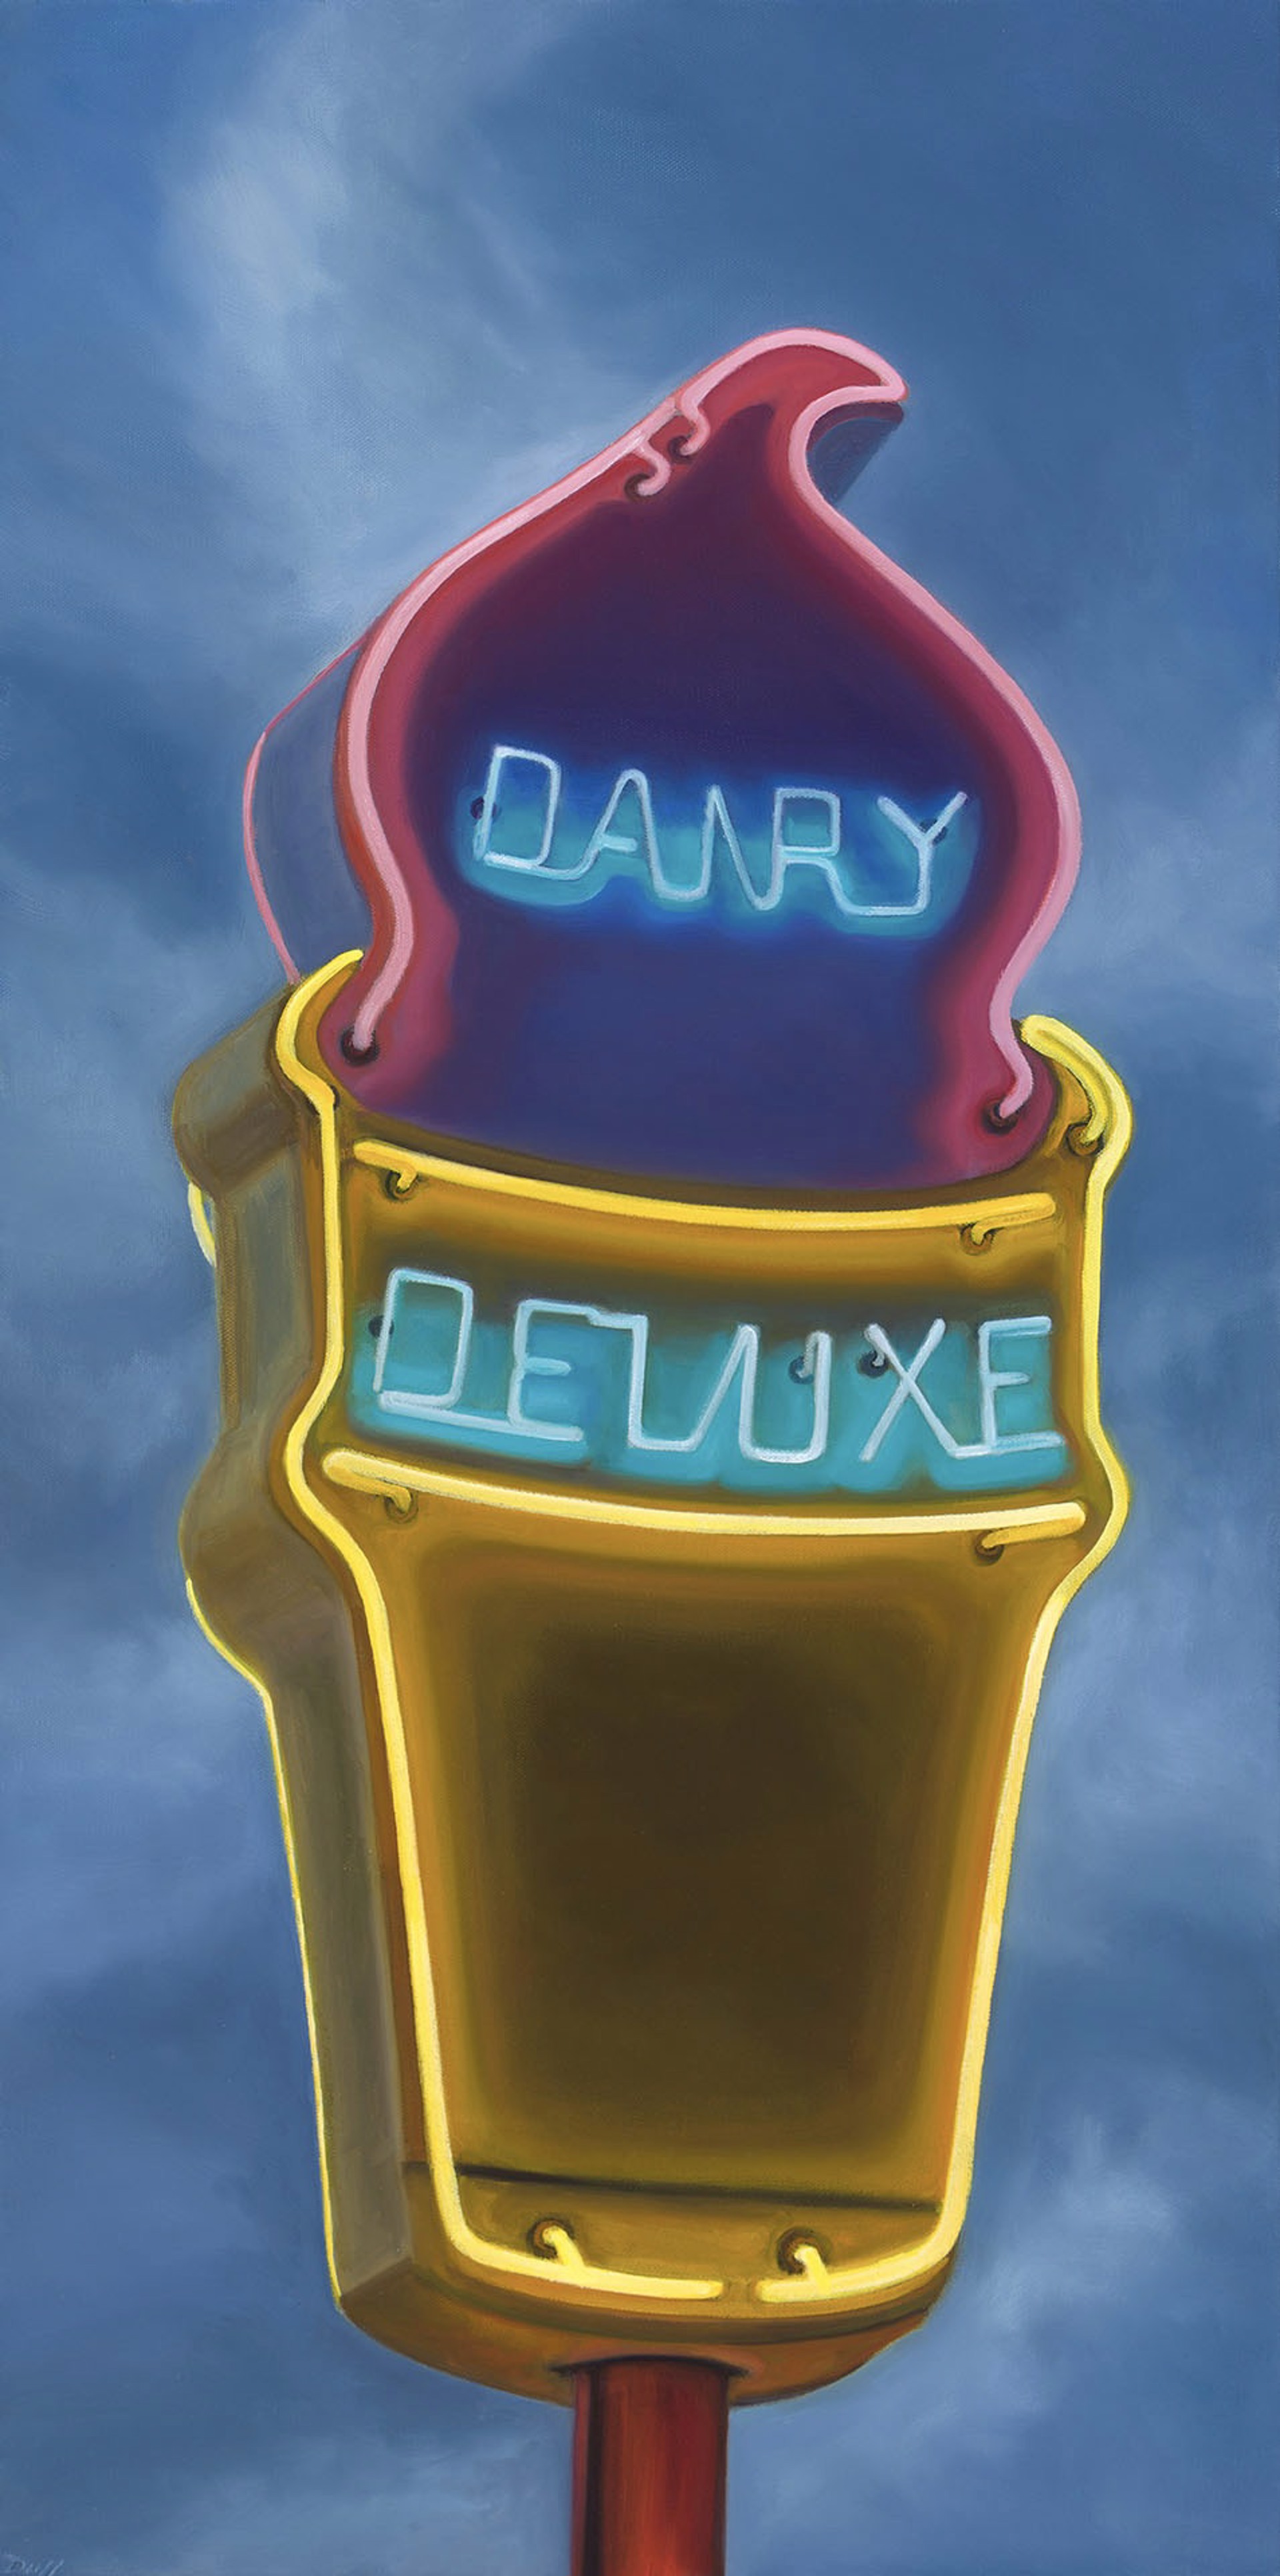 Dairy Deluxe by Edward Duff